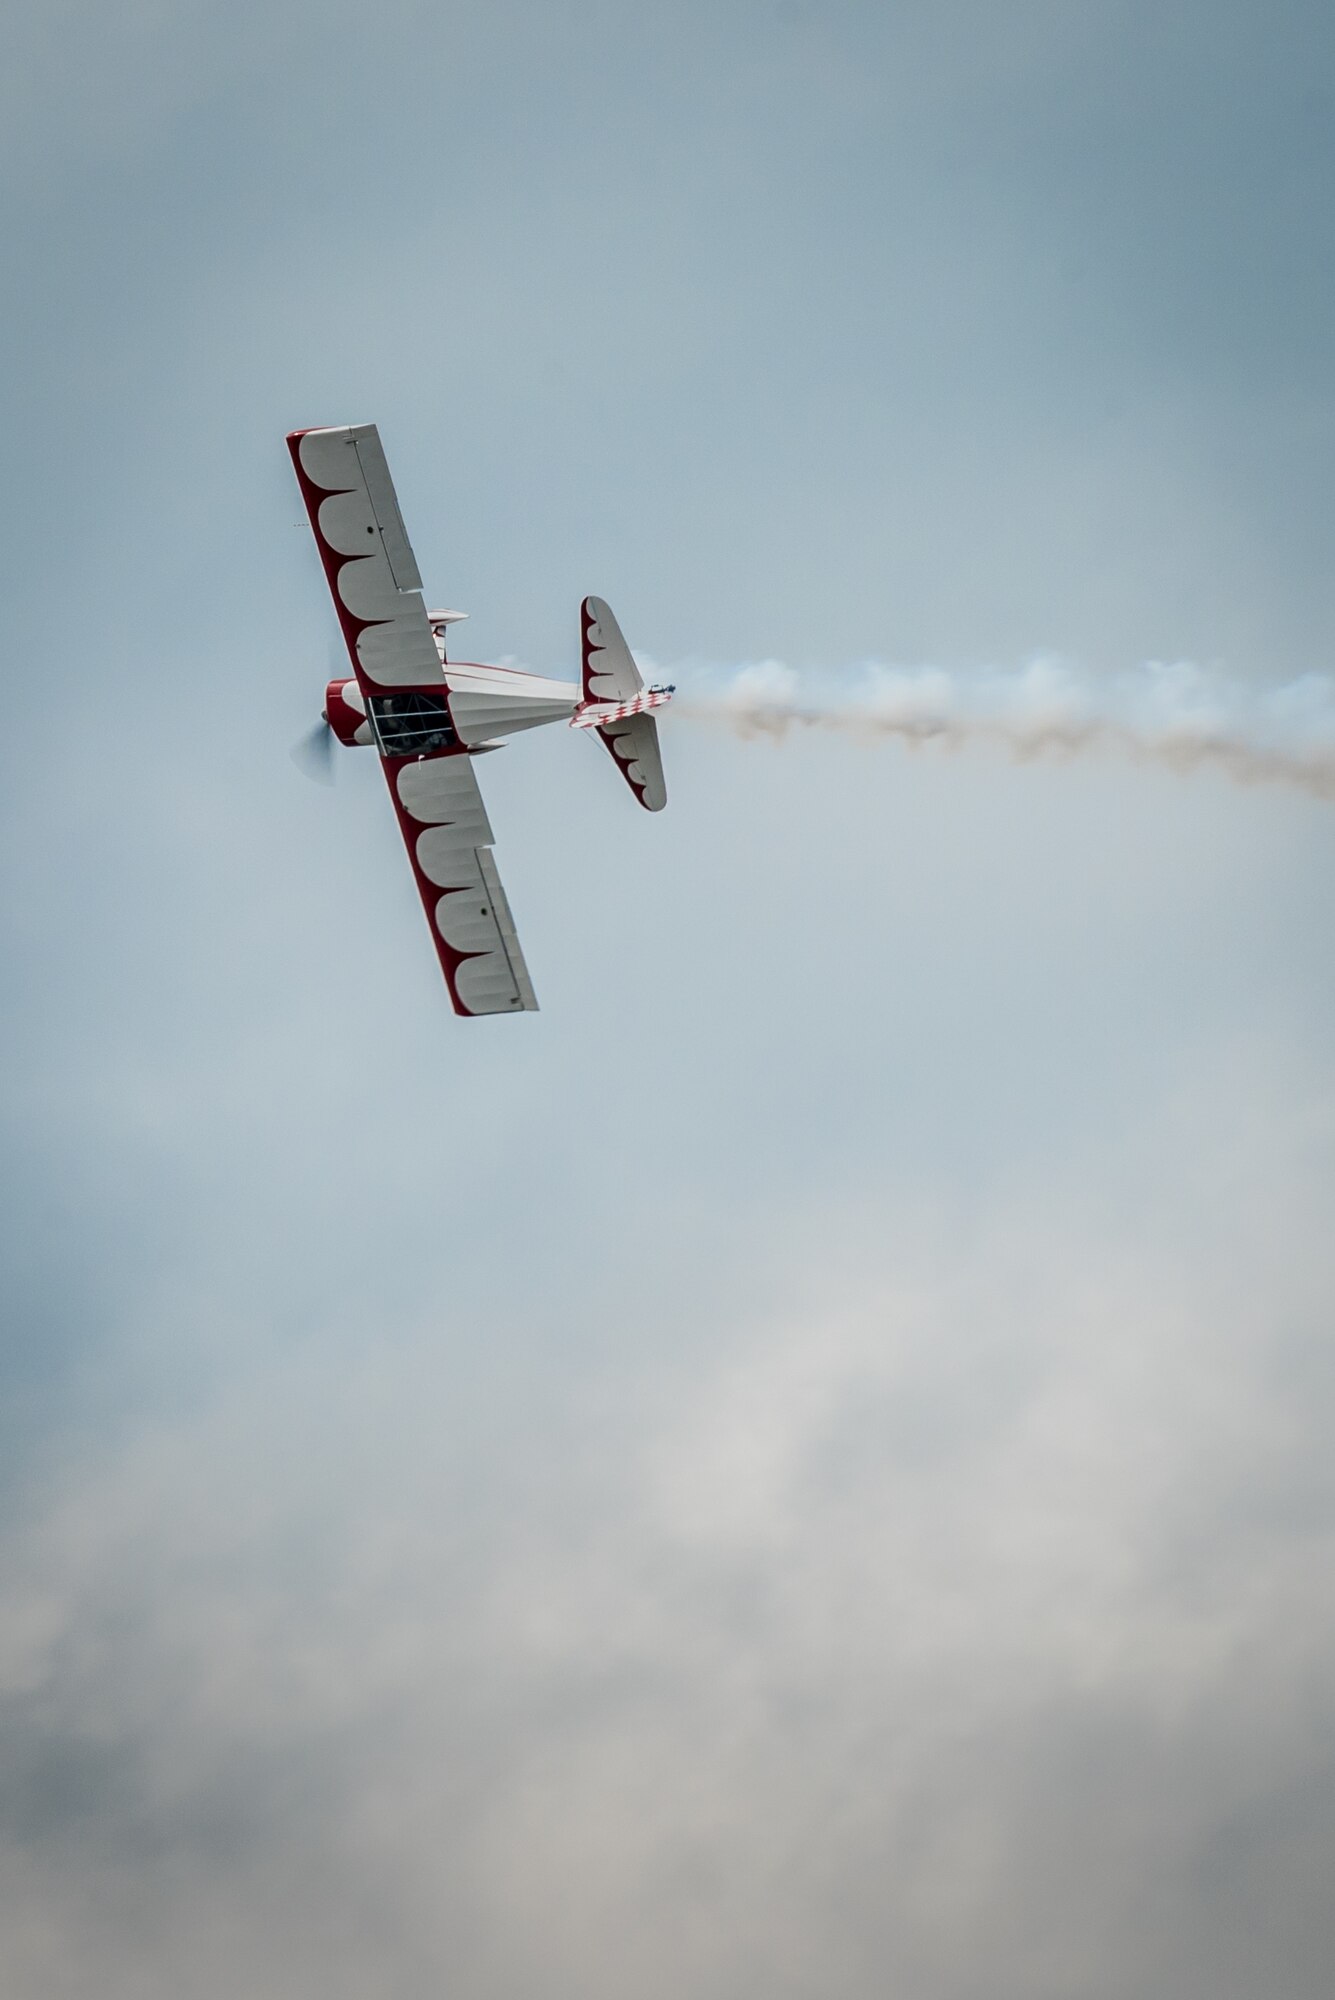 Nick Coleman, a pilot in the Kentucky Air National Guard’s 123rd Airlift Wing, flies an aerial demonstration in his personal T-Craft airplane April 22, 2017, during the Thunder Over Louisville air show in Louisville, Ky. The annual event has grown to become the largest single-day air show in the nation. (U.S. Air National Guard photo by Lt. Col. Dale Greer)